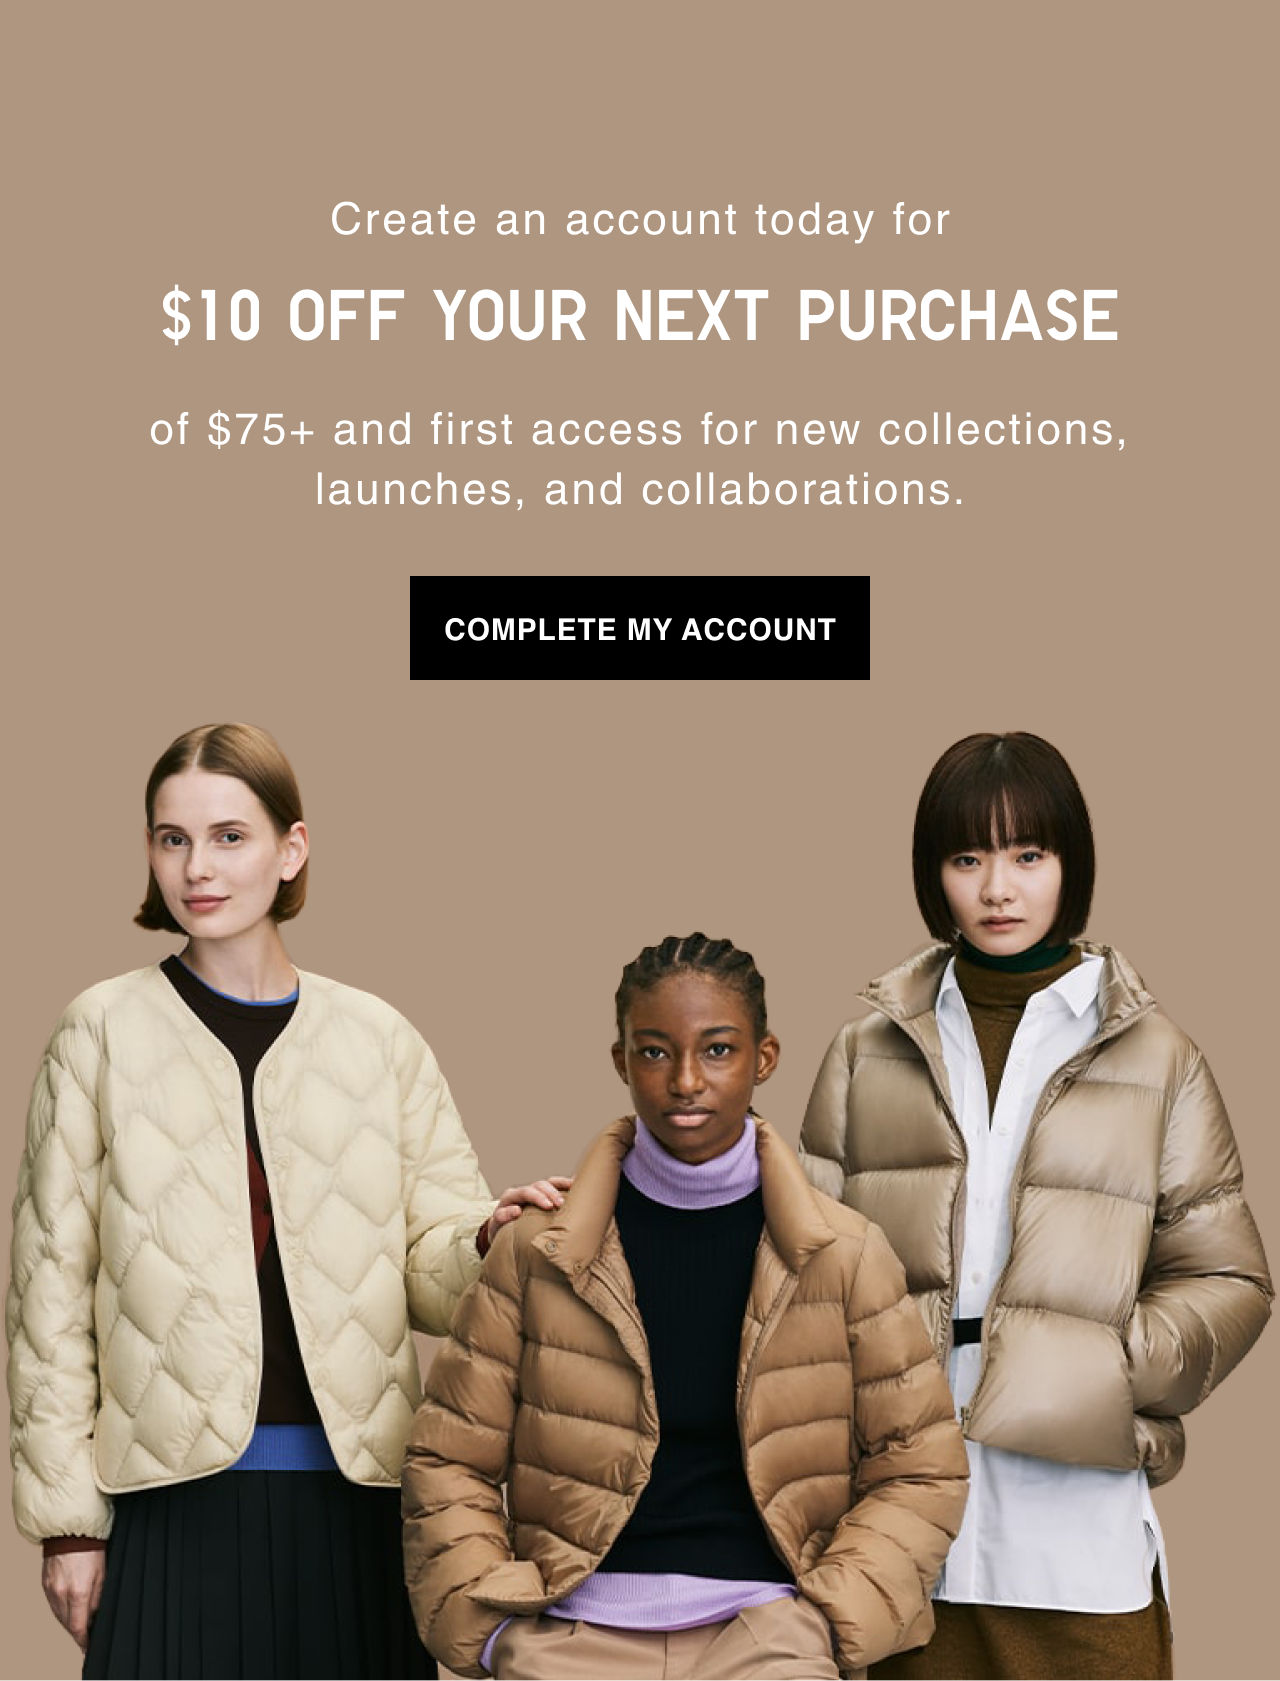 Create an account today. GET $10 OFF your next purchase of $75+. First access for new collections, launches, and collaborations Complete my account